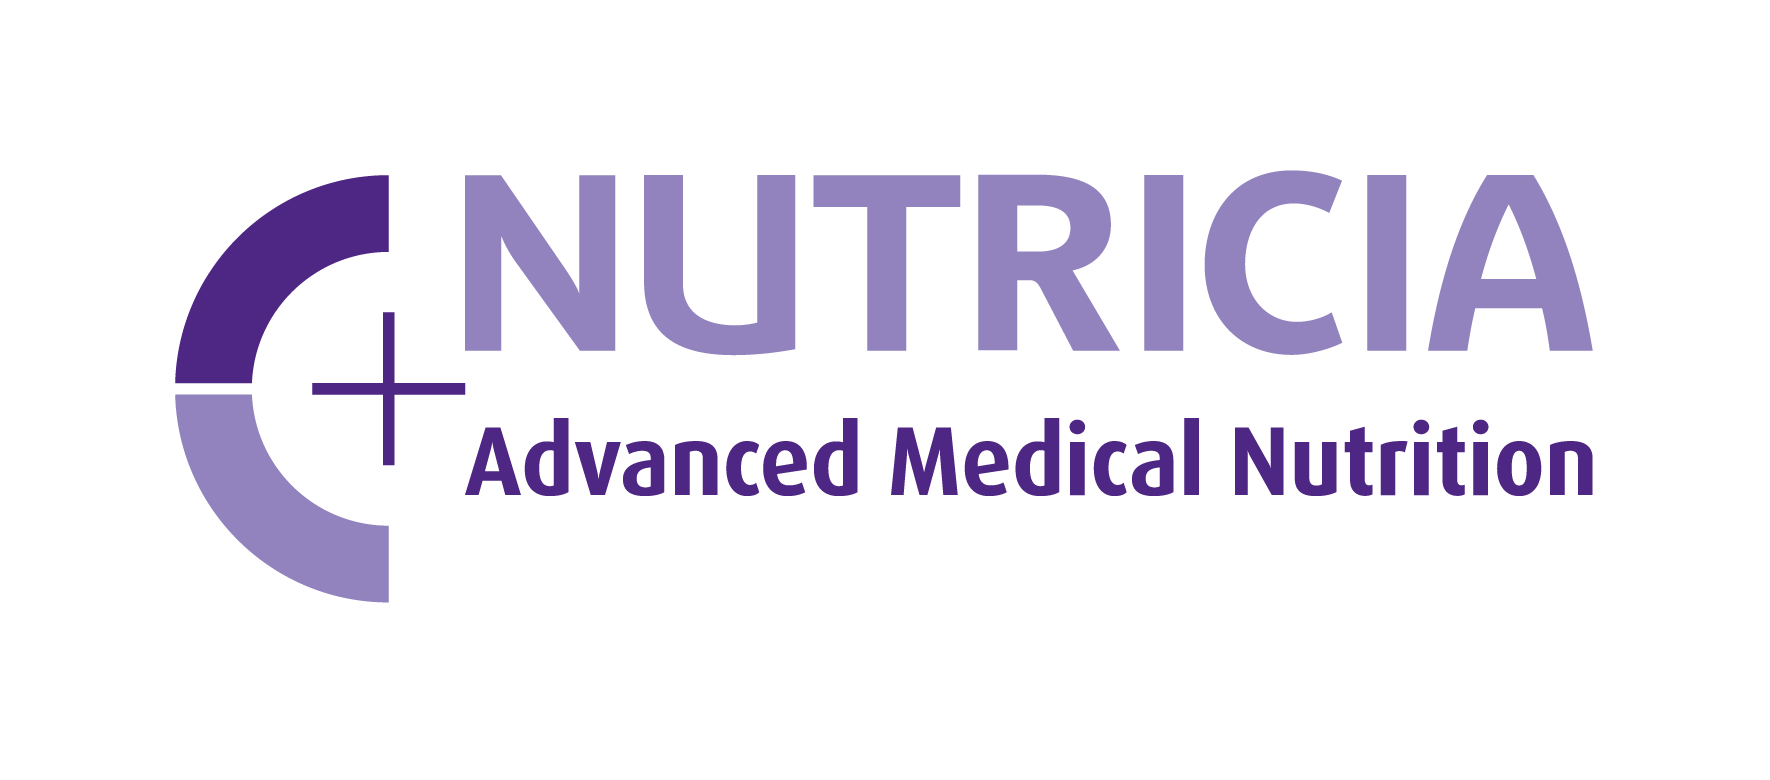 Email: medicalnutrition@nutricia.com Tel : +31204569000 Web: www.nutricia.com Nutricia Advanced Medical Nutrition is a specialised business of Danone, focused on pioneering nutritional solutions that help people live healthier and longer lives. Nutricia aims to establish medical nutrition as an integral part of healthcare, to fulfil Danone’s mission to bring health through food to as many people as possible. Nutricia’s extensive range of evidence-based nutrition products and services offer proven benefits and better patient outcomes. The company works with doctors and healthcare professionals in 40 countries to deliver better care and lower healthcare costs, serving patients in hospitals, care homes and in the community.